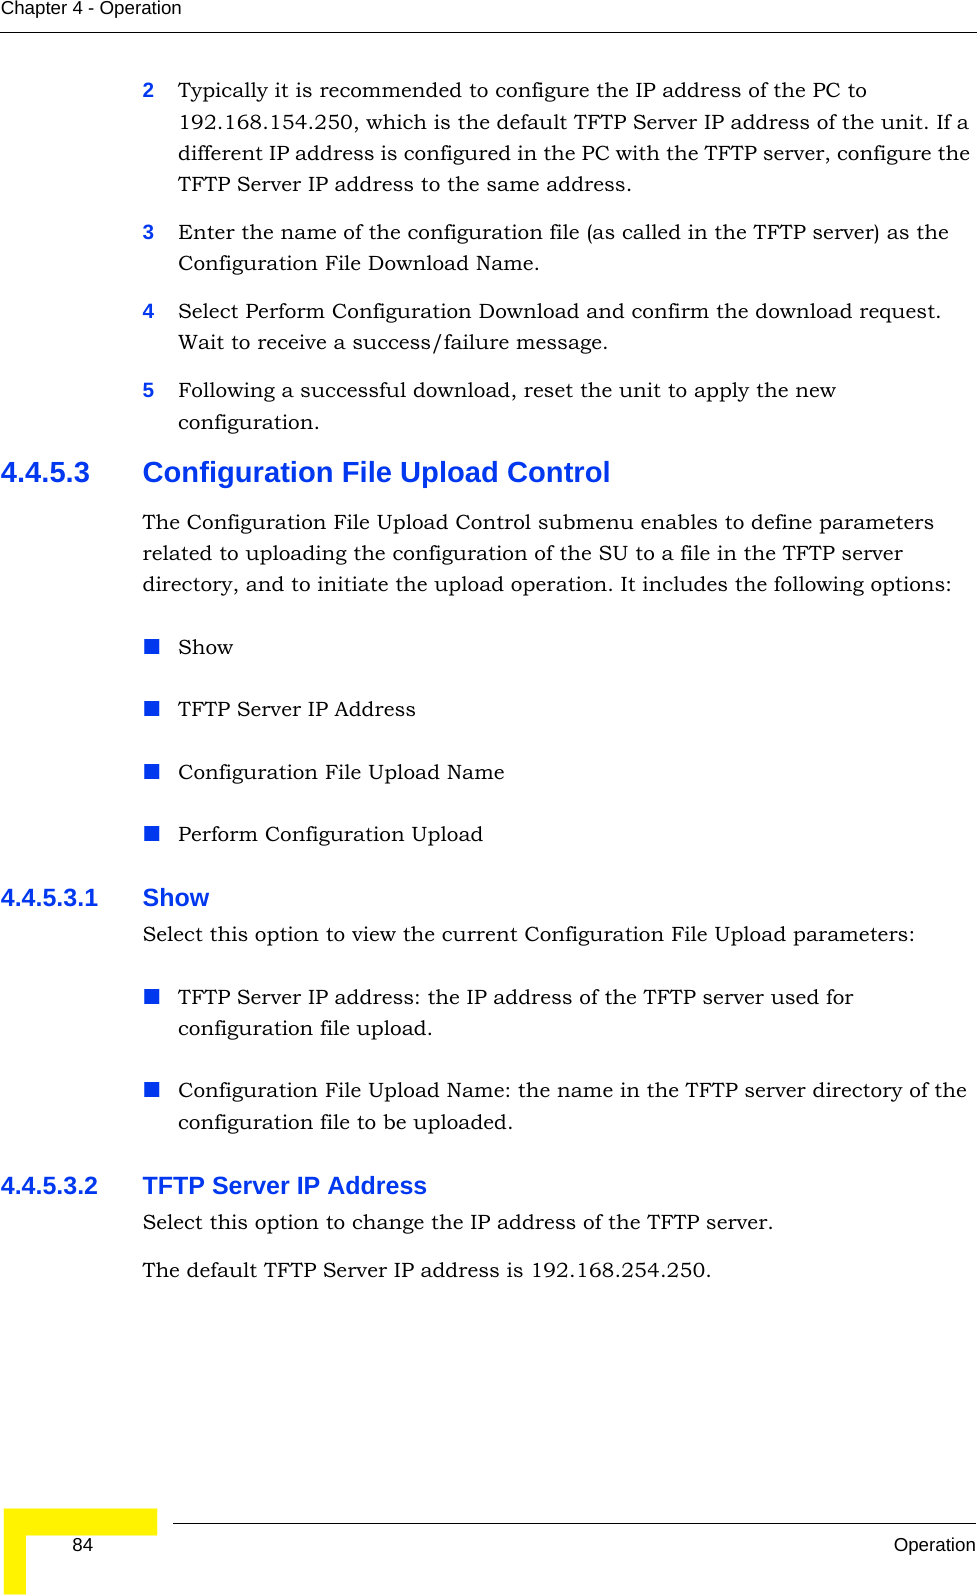  84 OperationChapter 4 - Operation2Typically it is recommended to configure the IP address of the PC to 192.168.154.250, which is the default TFTP Server IP address of the unit. If a different IP address is configured in the PC with the TFTP server, configure the TFTP Server IP address to the same address.3Enter the name of the configuration file (as called in the TFTP server) as the Configuration File Download Name.4Select Perform Configuration Download and confirm the download request. Wait to receive a success/failure message.5Following a successful download, reset the unit to apply the new configuration.4.4.5.3 Configuration File Upload ControlThe Configuration File Upload Control submenu enables to define parameters related to uploading the configuration of the SU to a file in the TFTP server directory, and to initiate the upload operation. It includes the following options:ShowTFTP Server IP AddressConfiguration File Upload NamePerform Configuration Upload4.4.5.3.1 Show Select this option to view the current Configuration File Upload parameters:TFTP Server IP address: the IP address of the TFTP server used for configuration file upload.Configuration File Upload Name: the name in the TFTP server directory of the configuration file to be uploaded.4.4.5.3.2 TFTP Server IP AddressSelect this option to change the IP address of the TFTP server.The default TFTP Server IP address is 192.168.254.250.